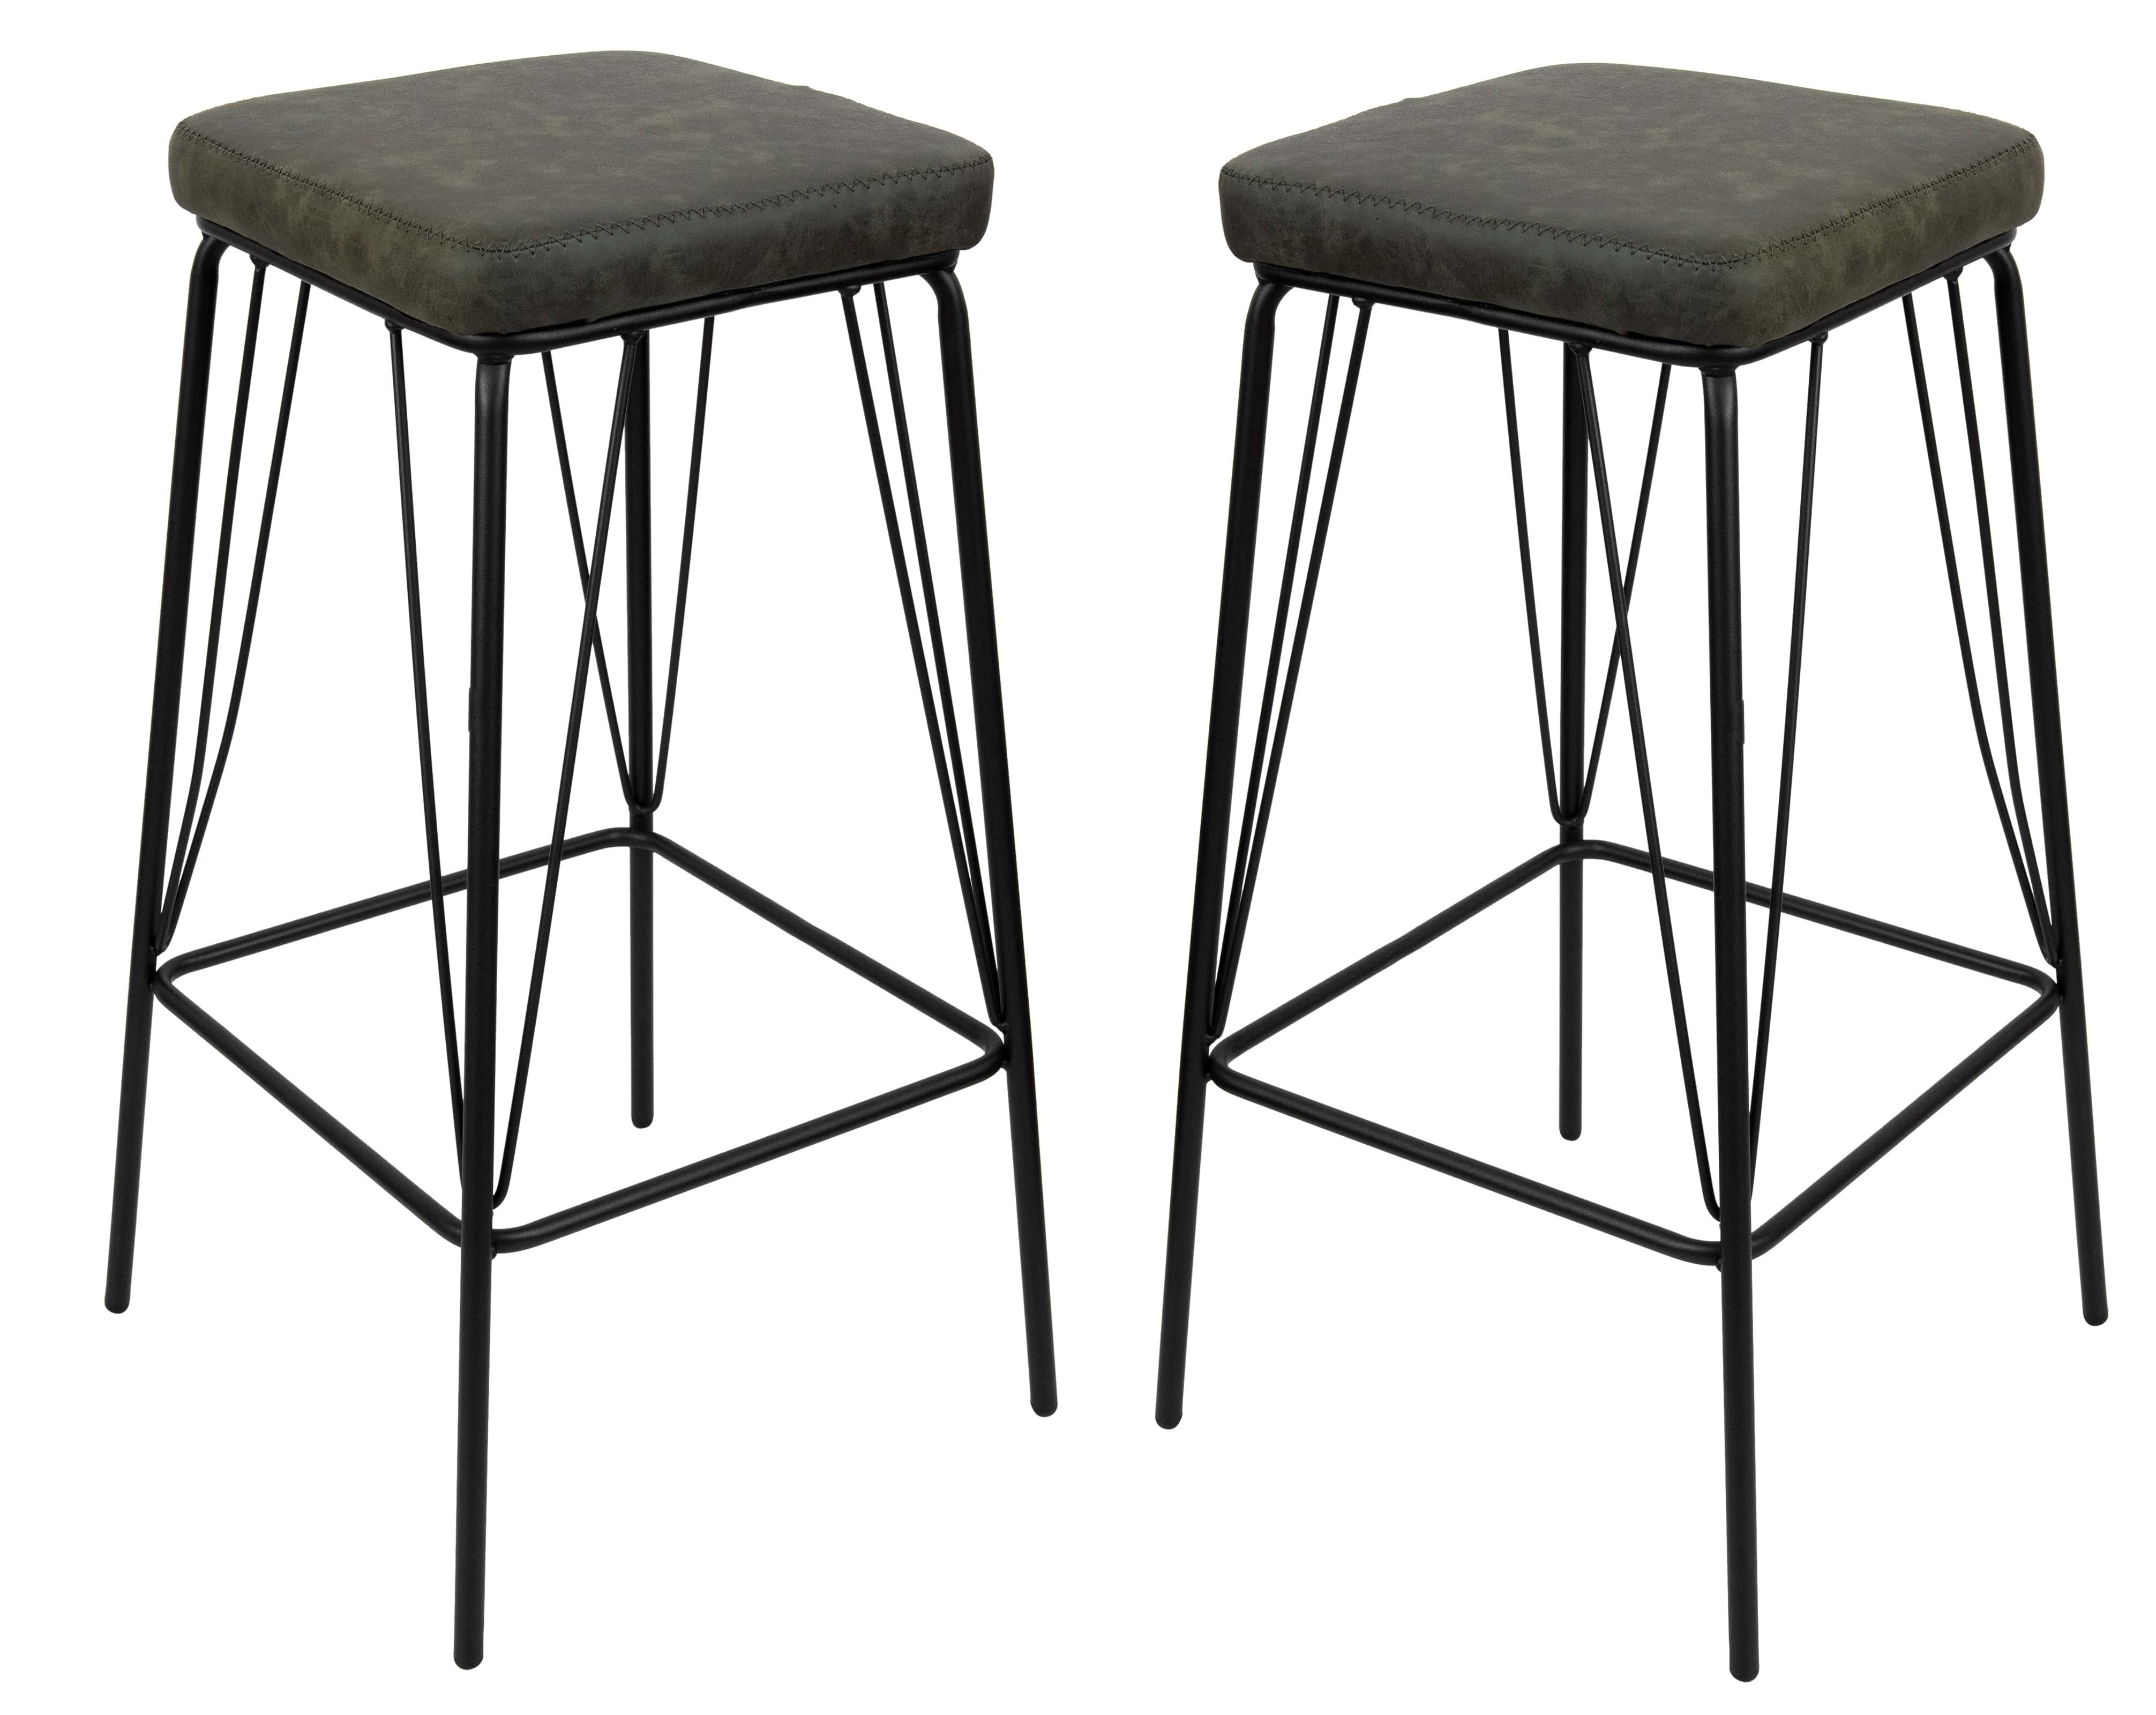 Aki Bar Stool With Foot Rest Set of 2